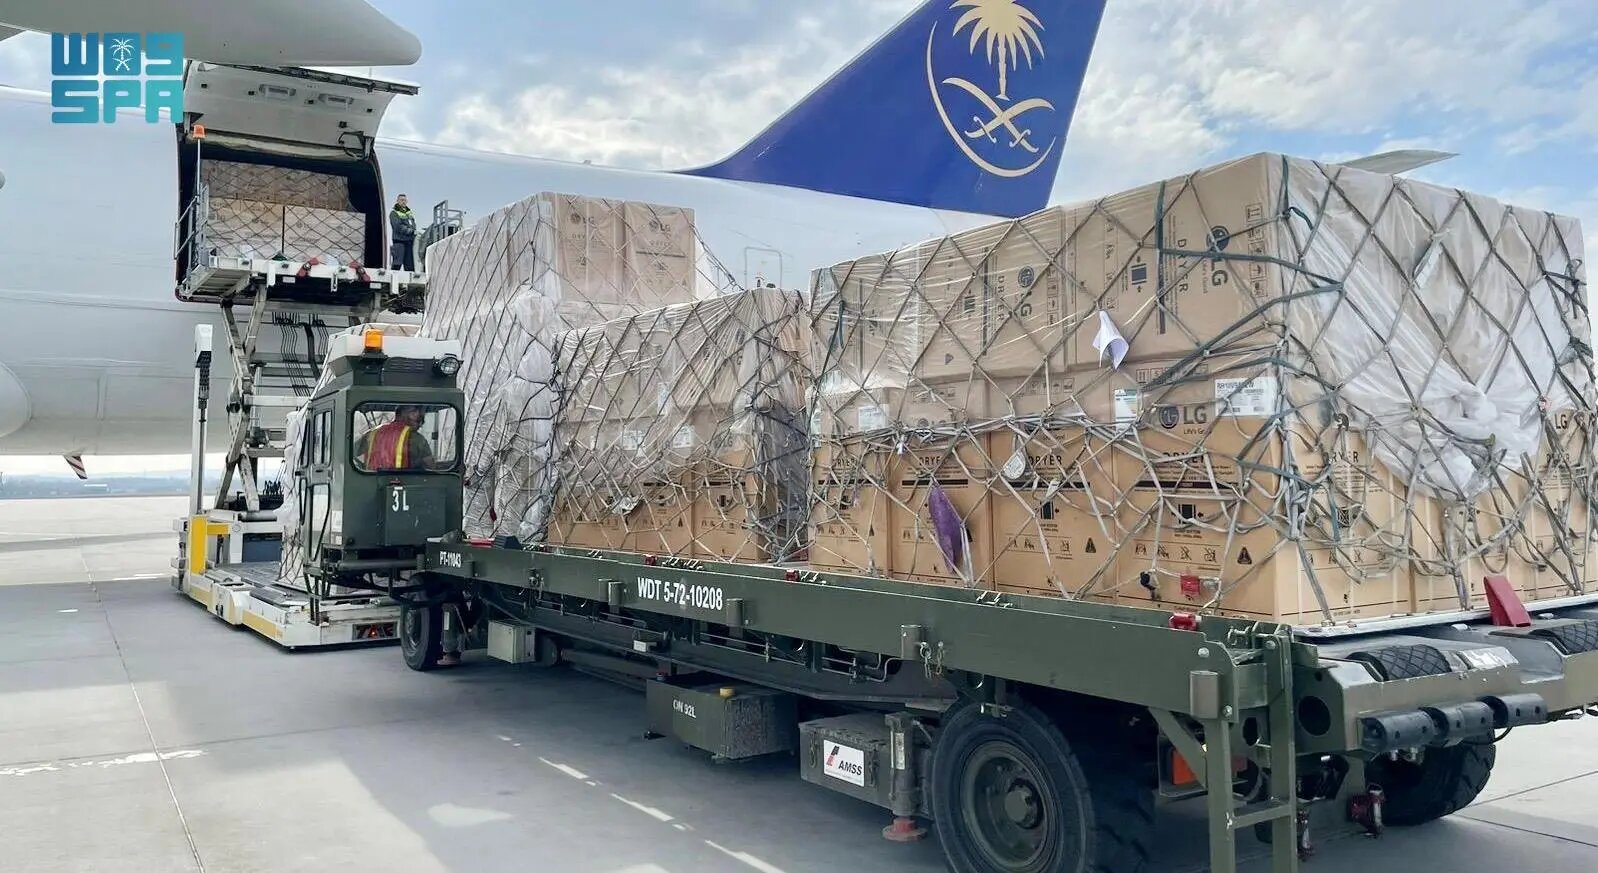 21st Saudi Relief Plane Arrives in Poland to Deliver Aid to Ukrainian People